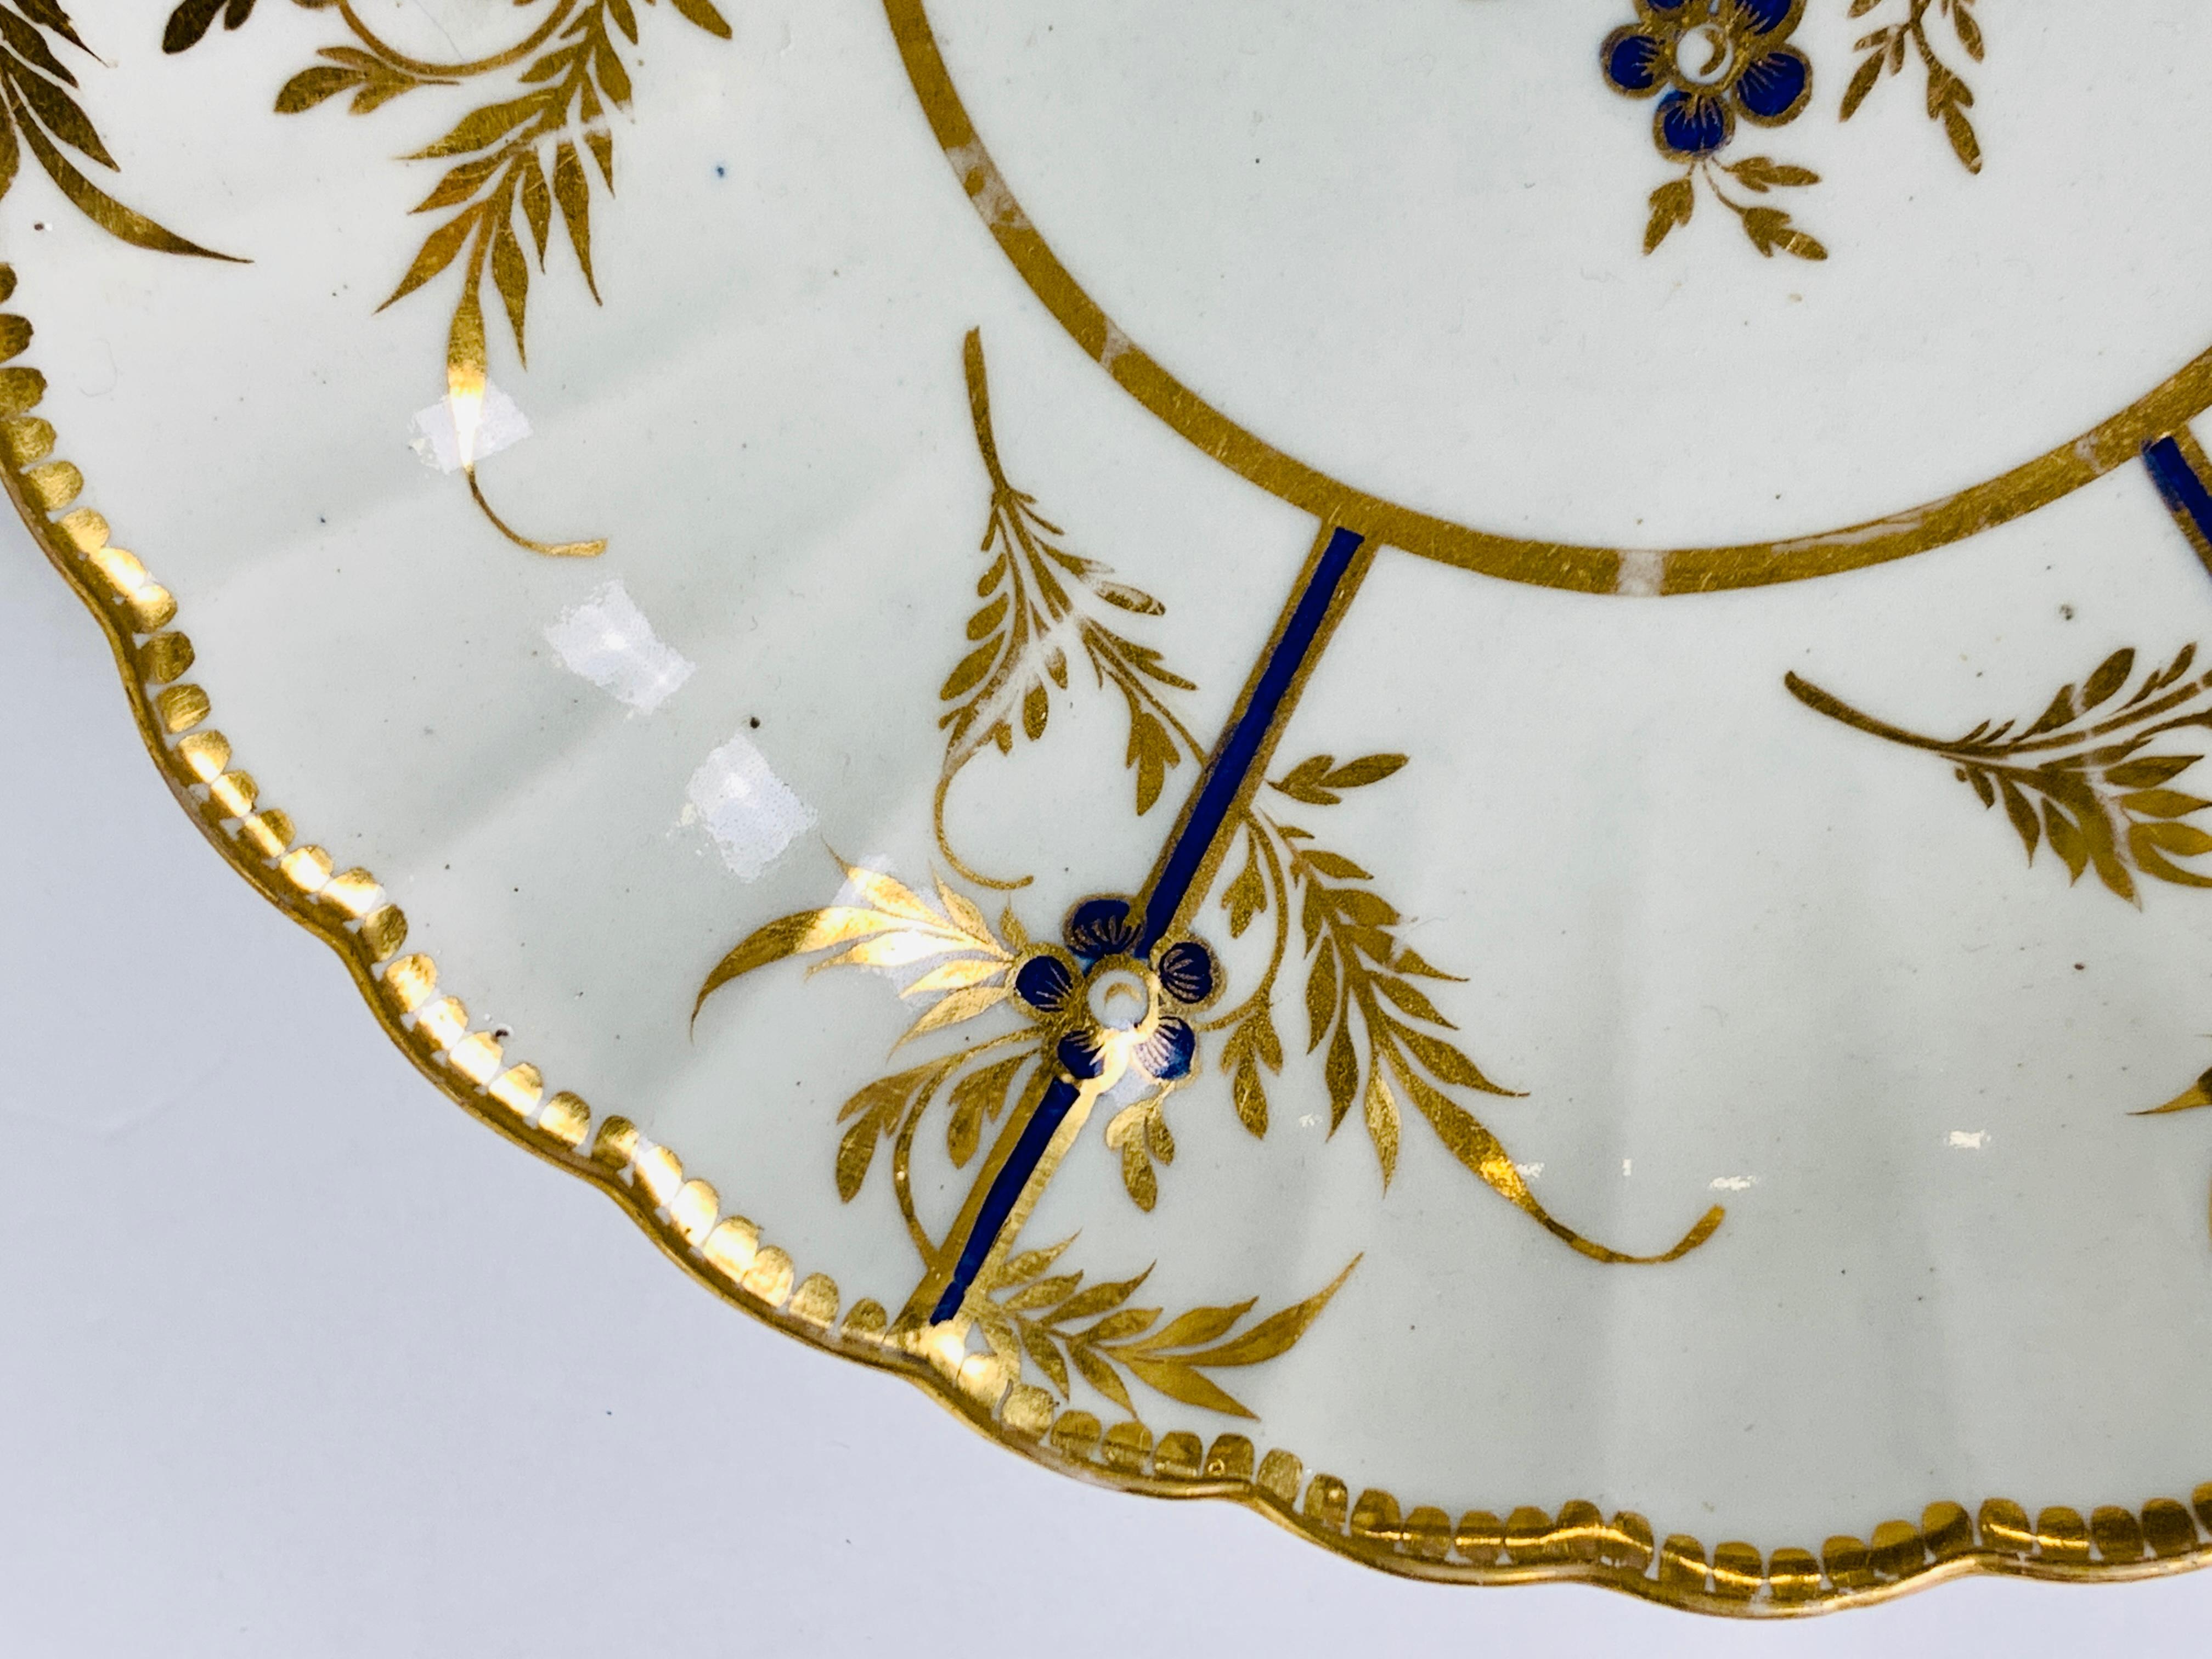 Hand-Painted Antique Blue & Gold English Porcelain Dish 18th Century c-1780 For Sale 2